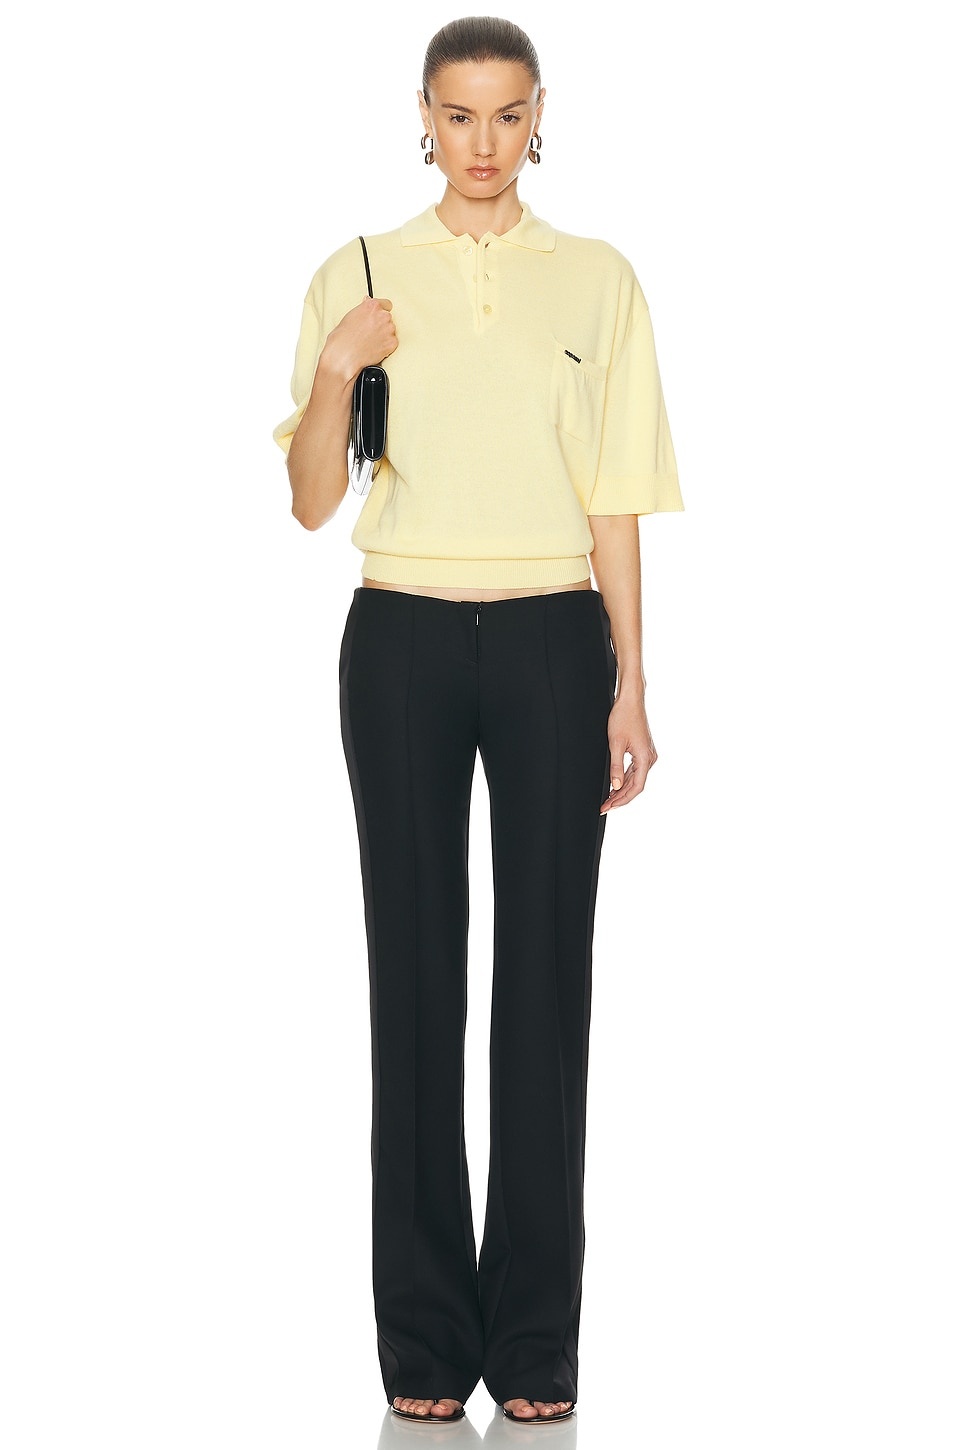 Knotted Short Sleeved Polo Top - 4